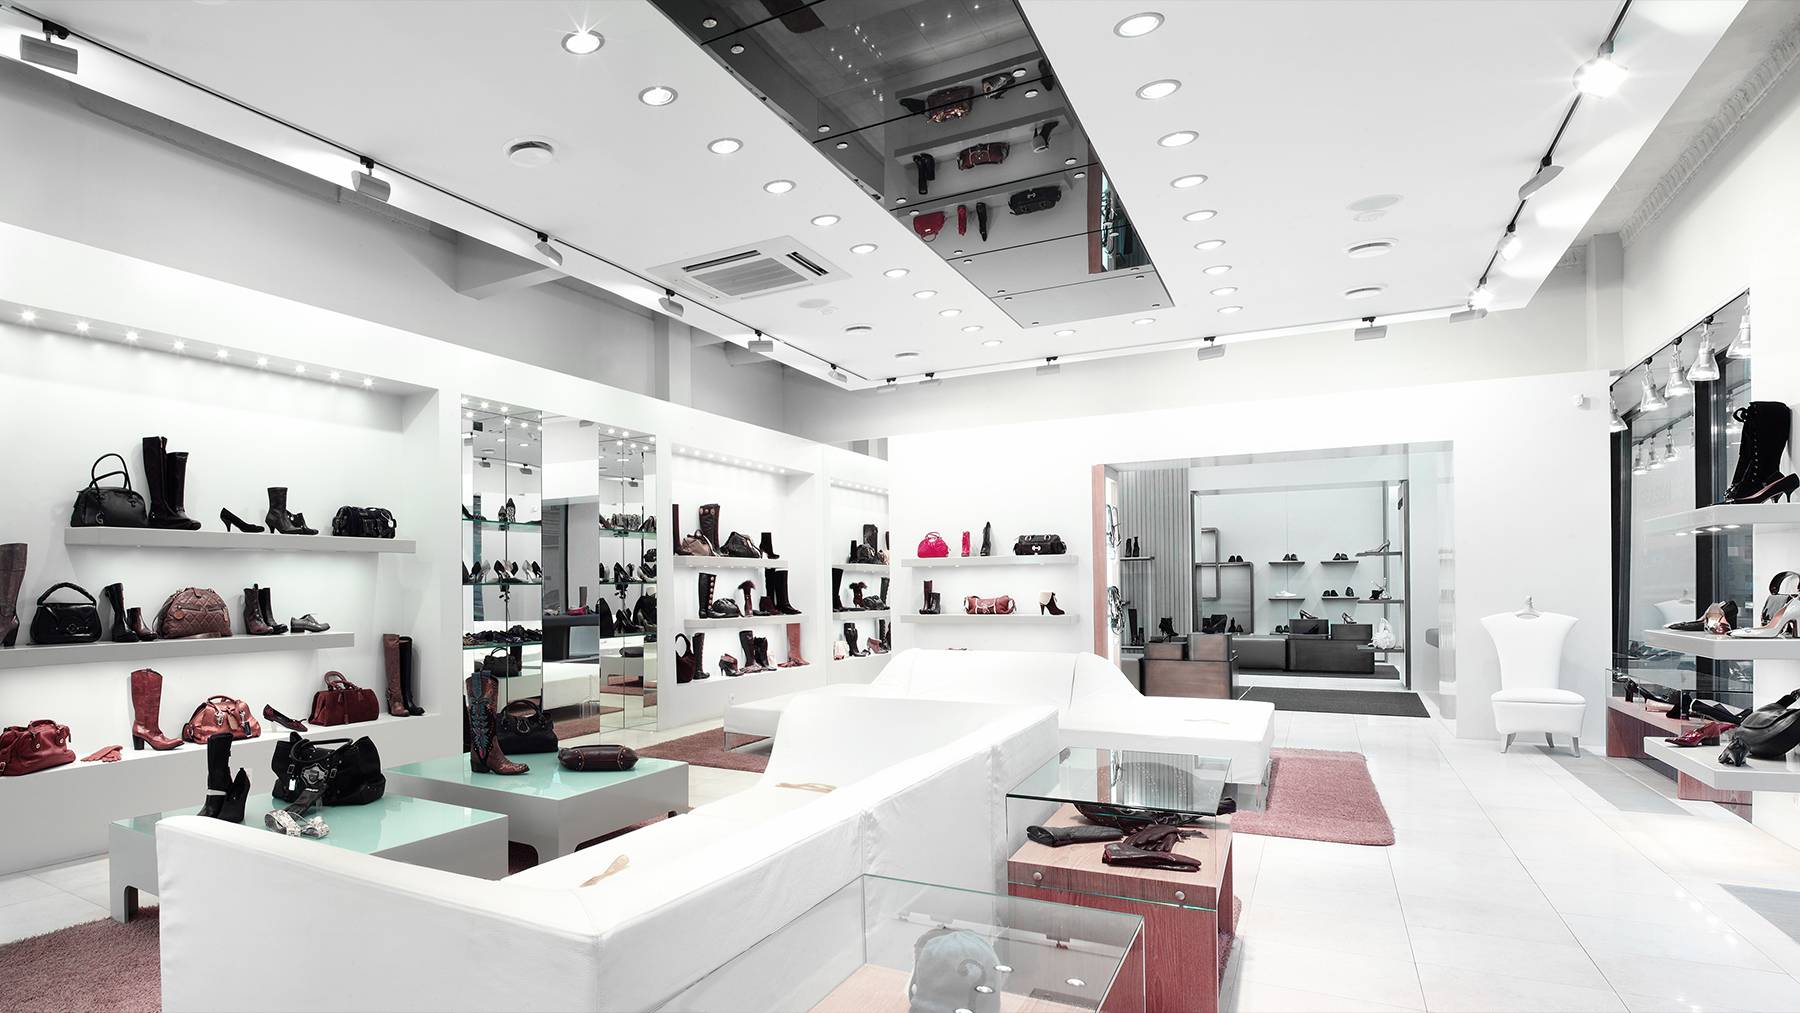 A pristine store with modern interiors.